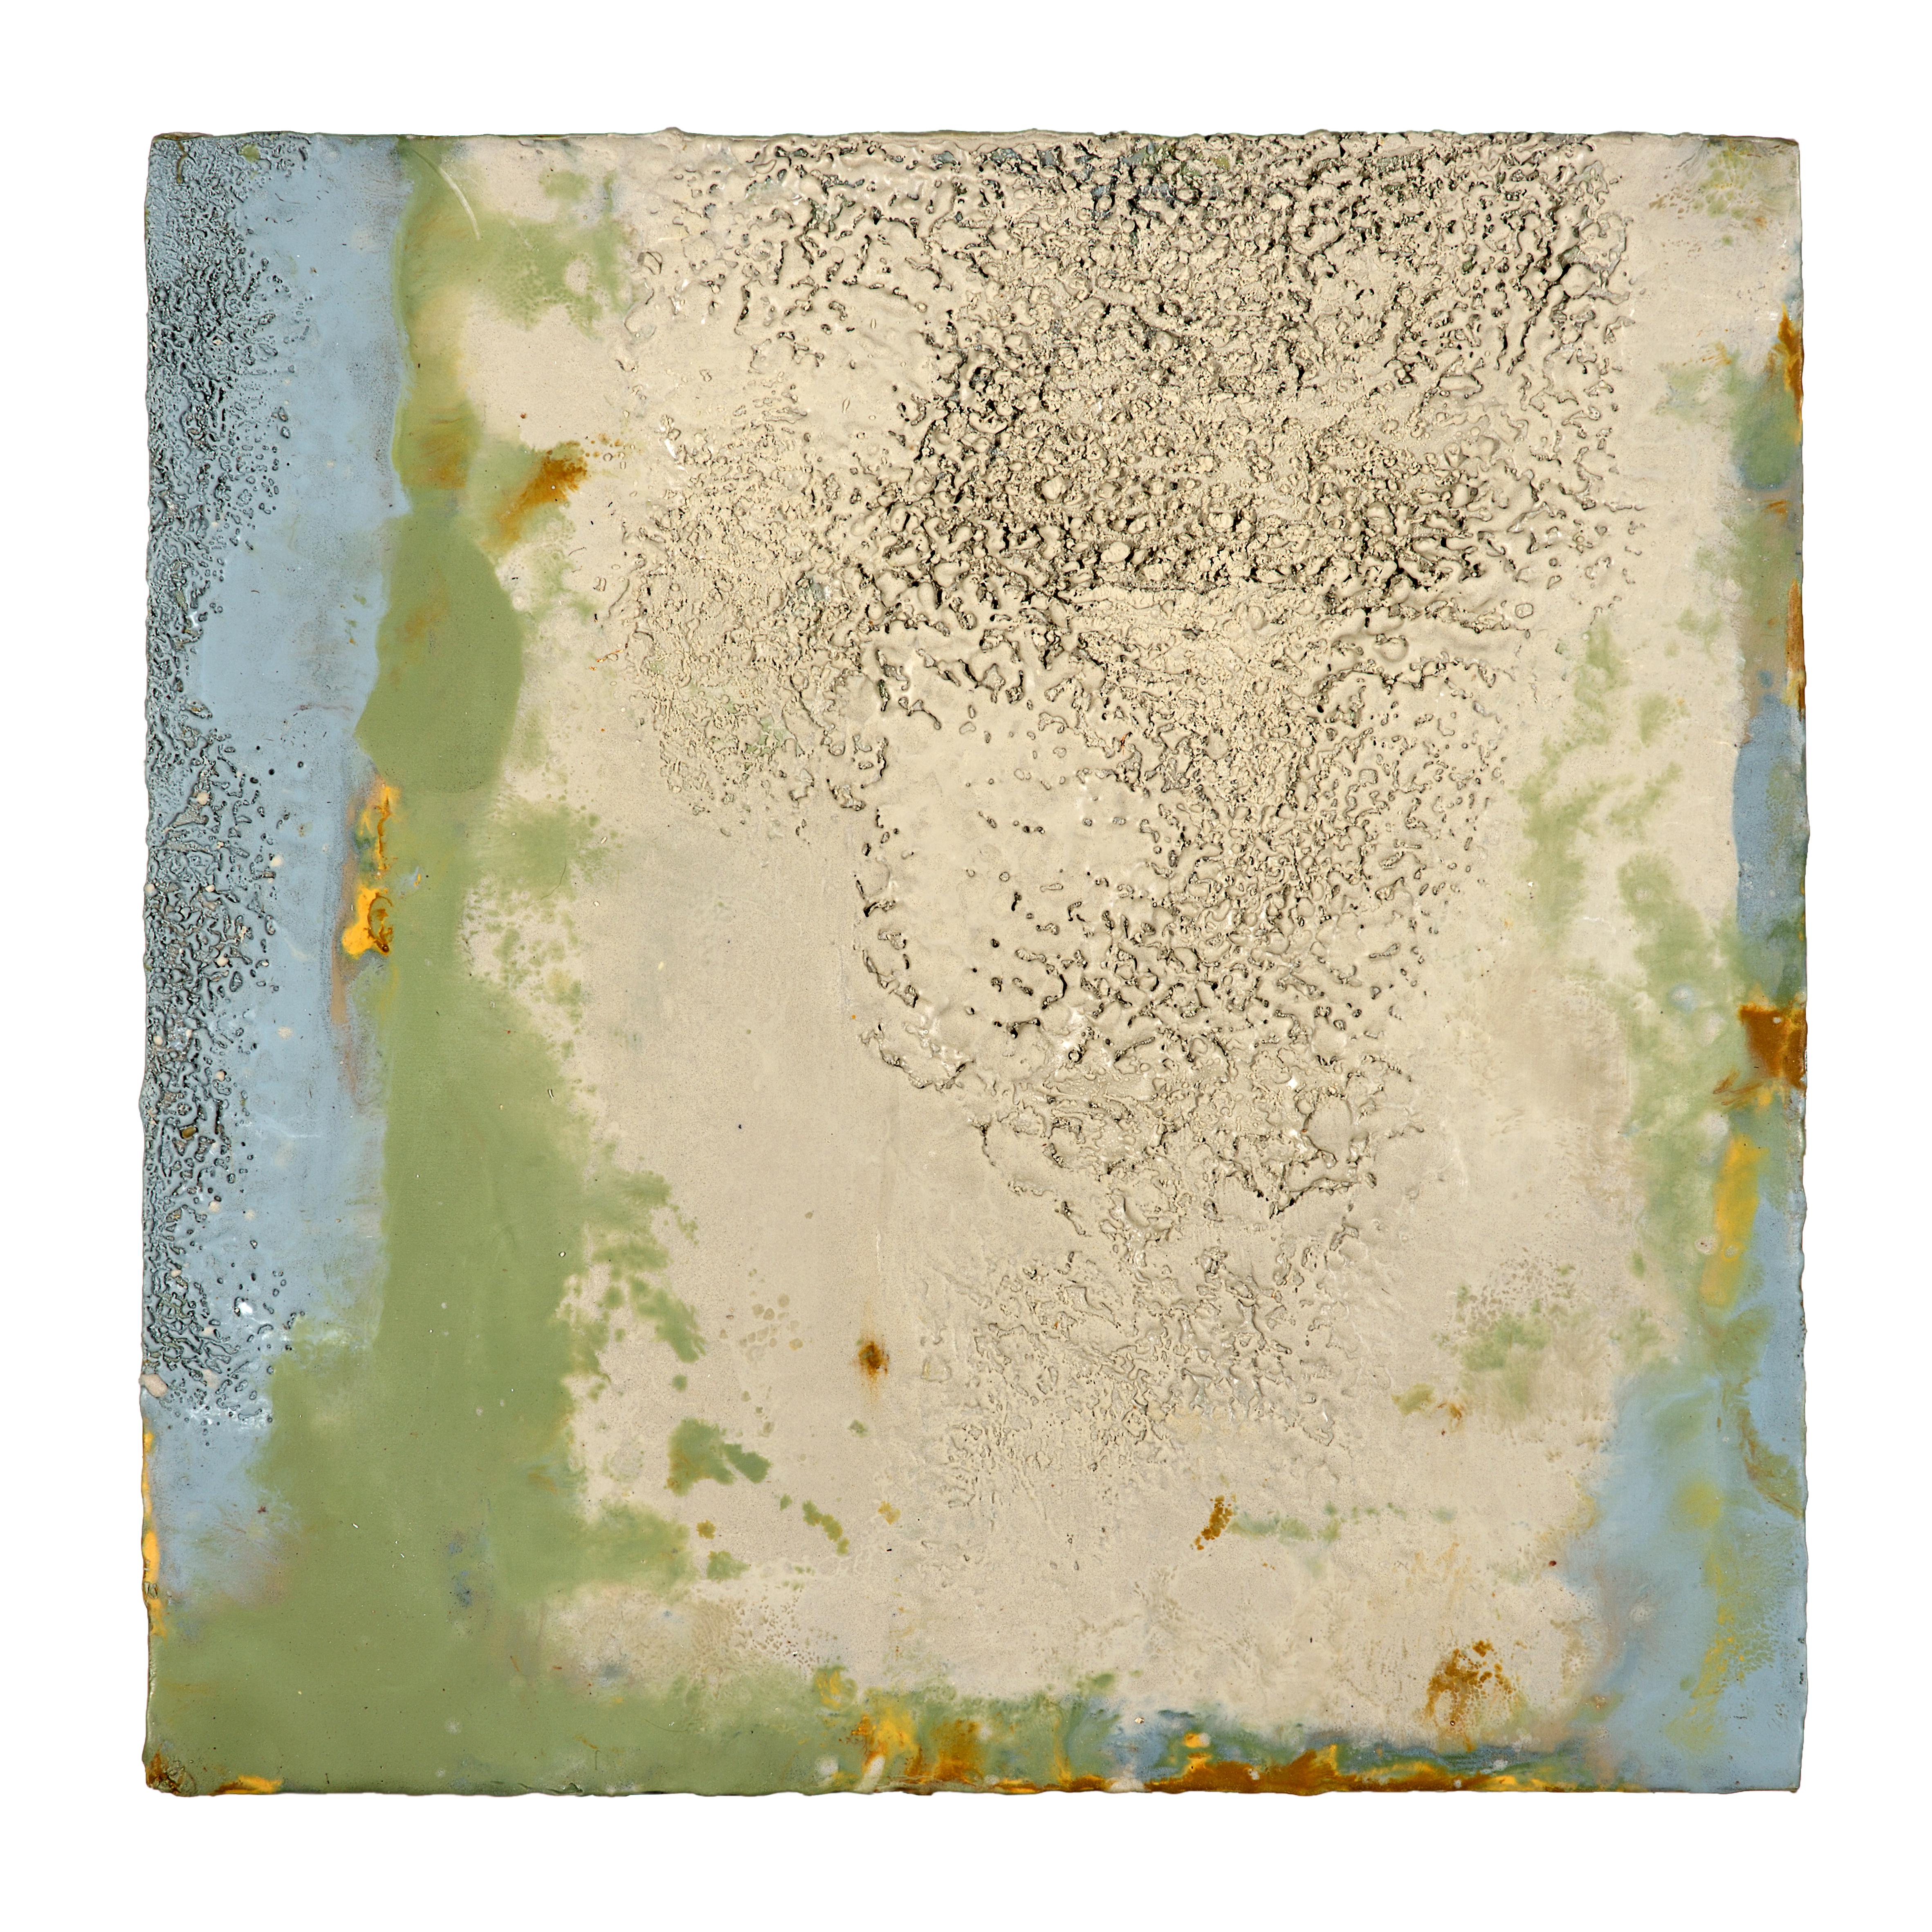 Modern Richard Hirsch Encaustic Painting of Nothing #78, 2020 For Sale